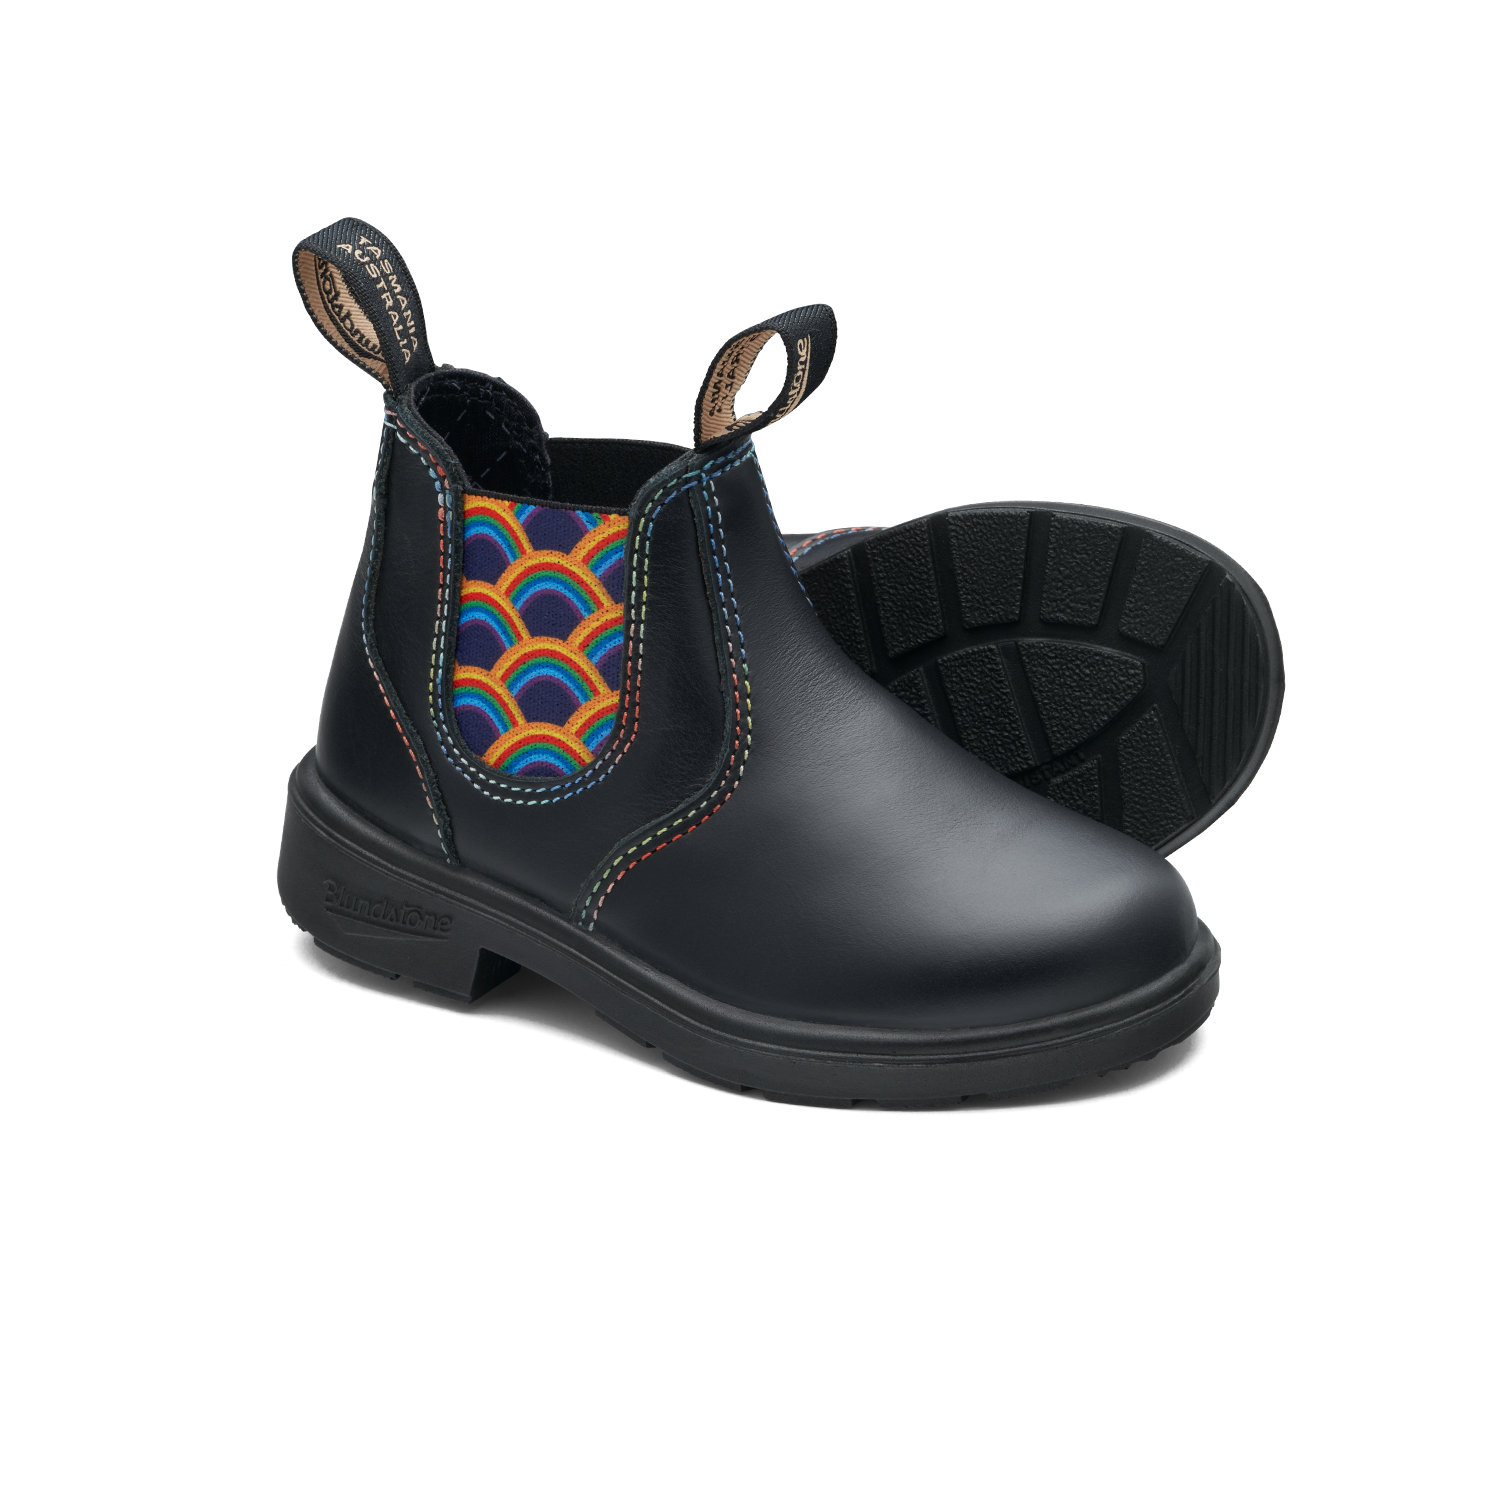 Blundstone 2254 Kids Black with Rainbow Elastic and Contrast Stitching pairs